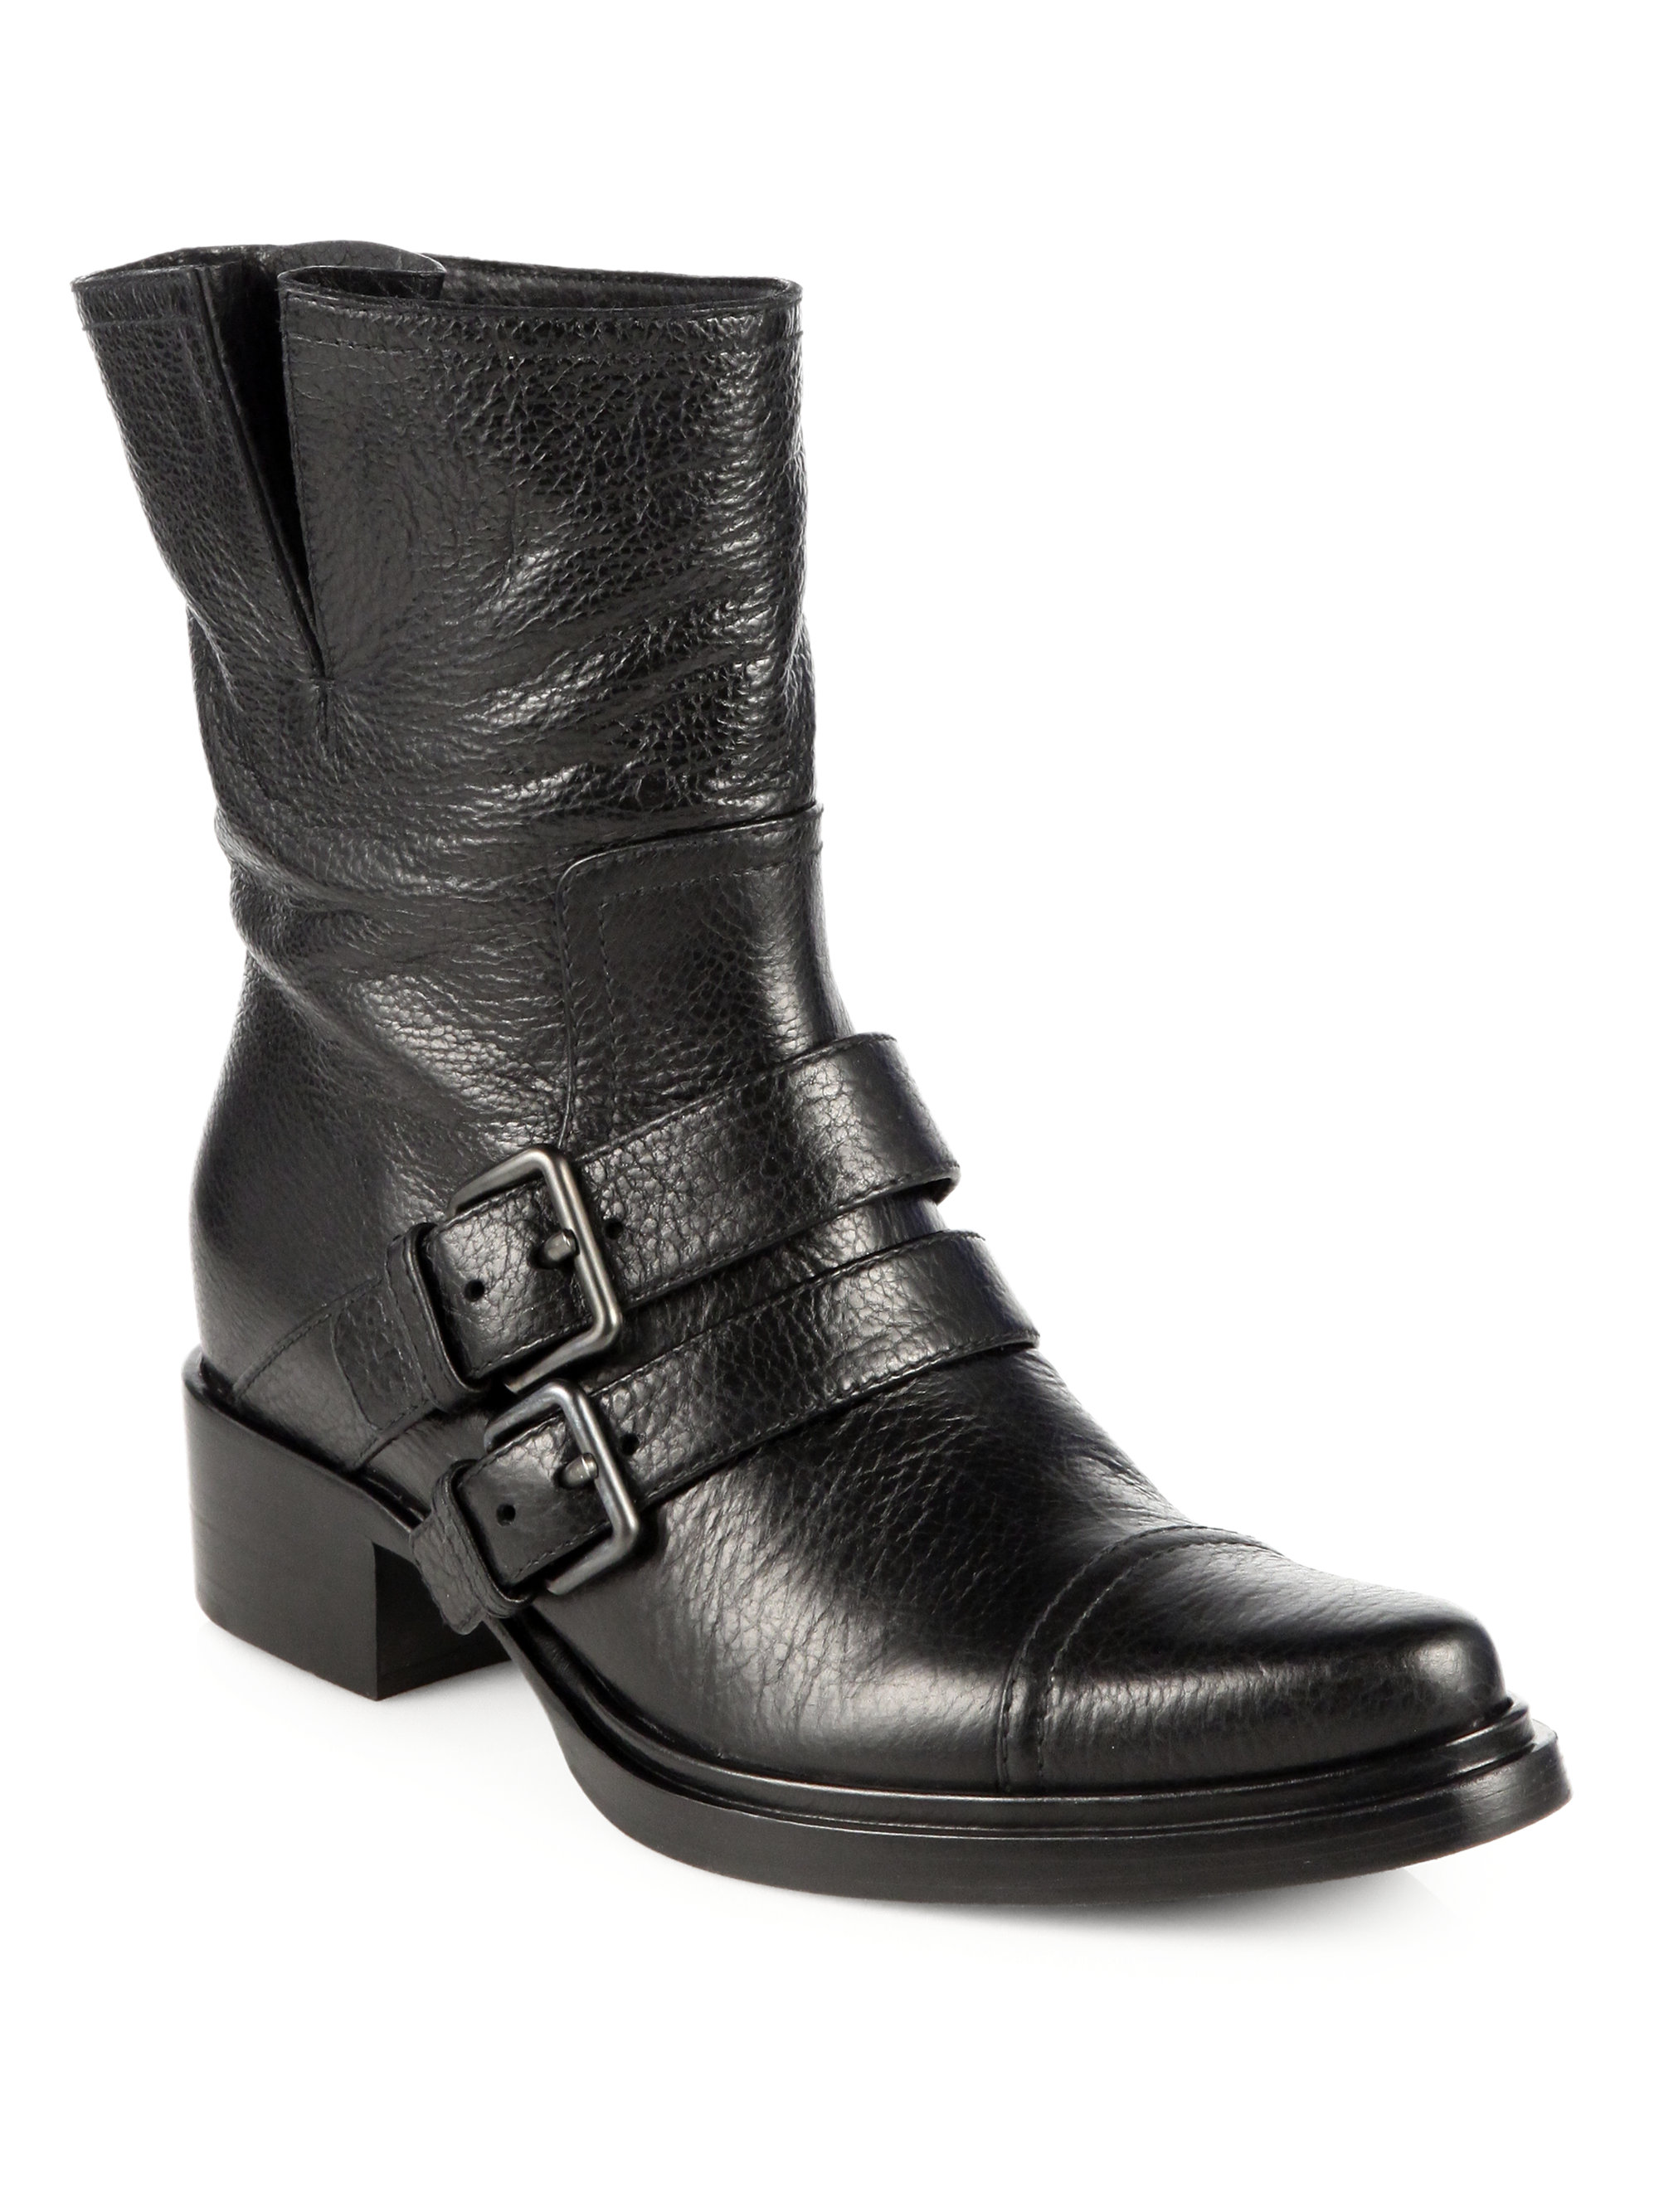 Lyst - Miu Miu Leather Doublestrap Motorcycle Boots in Black